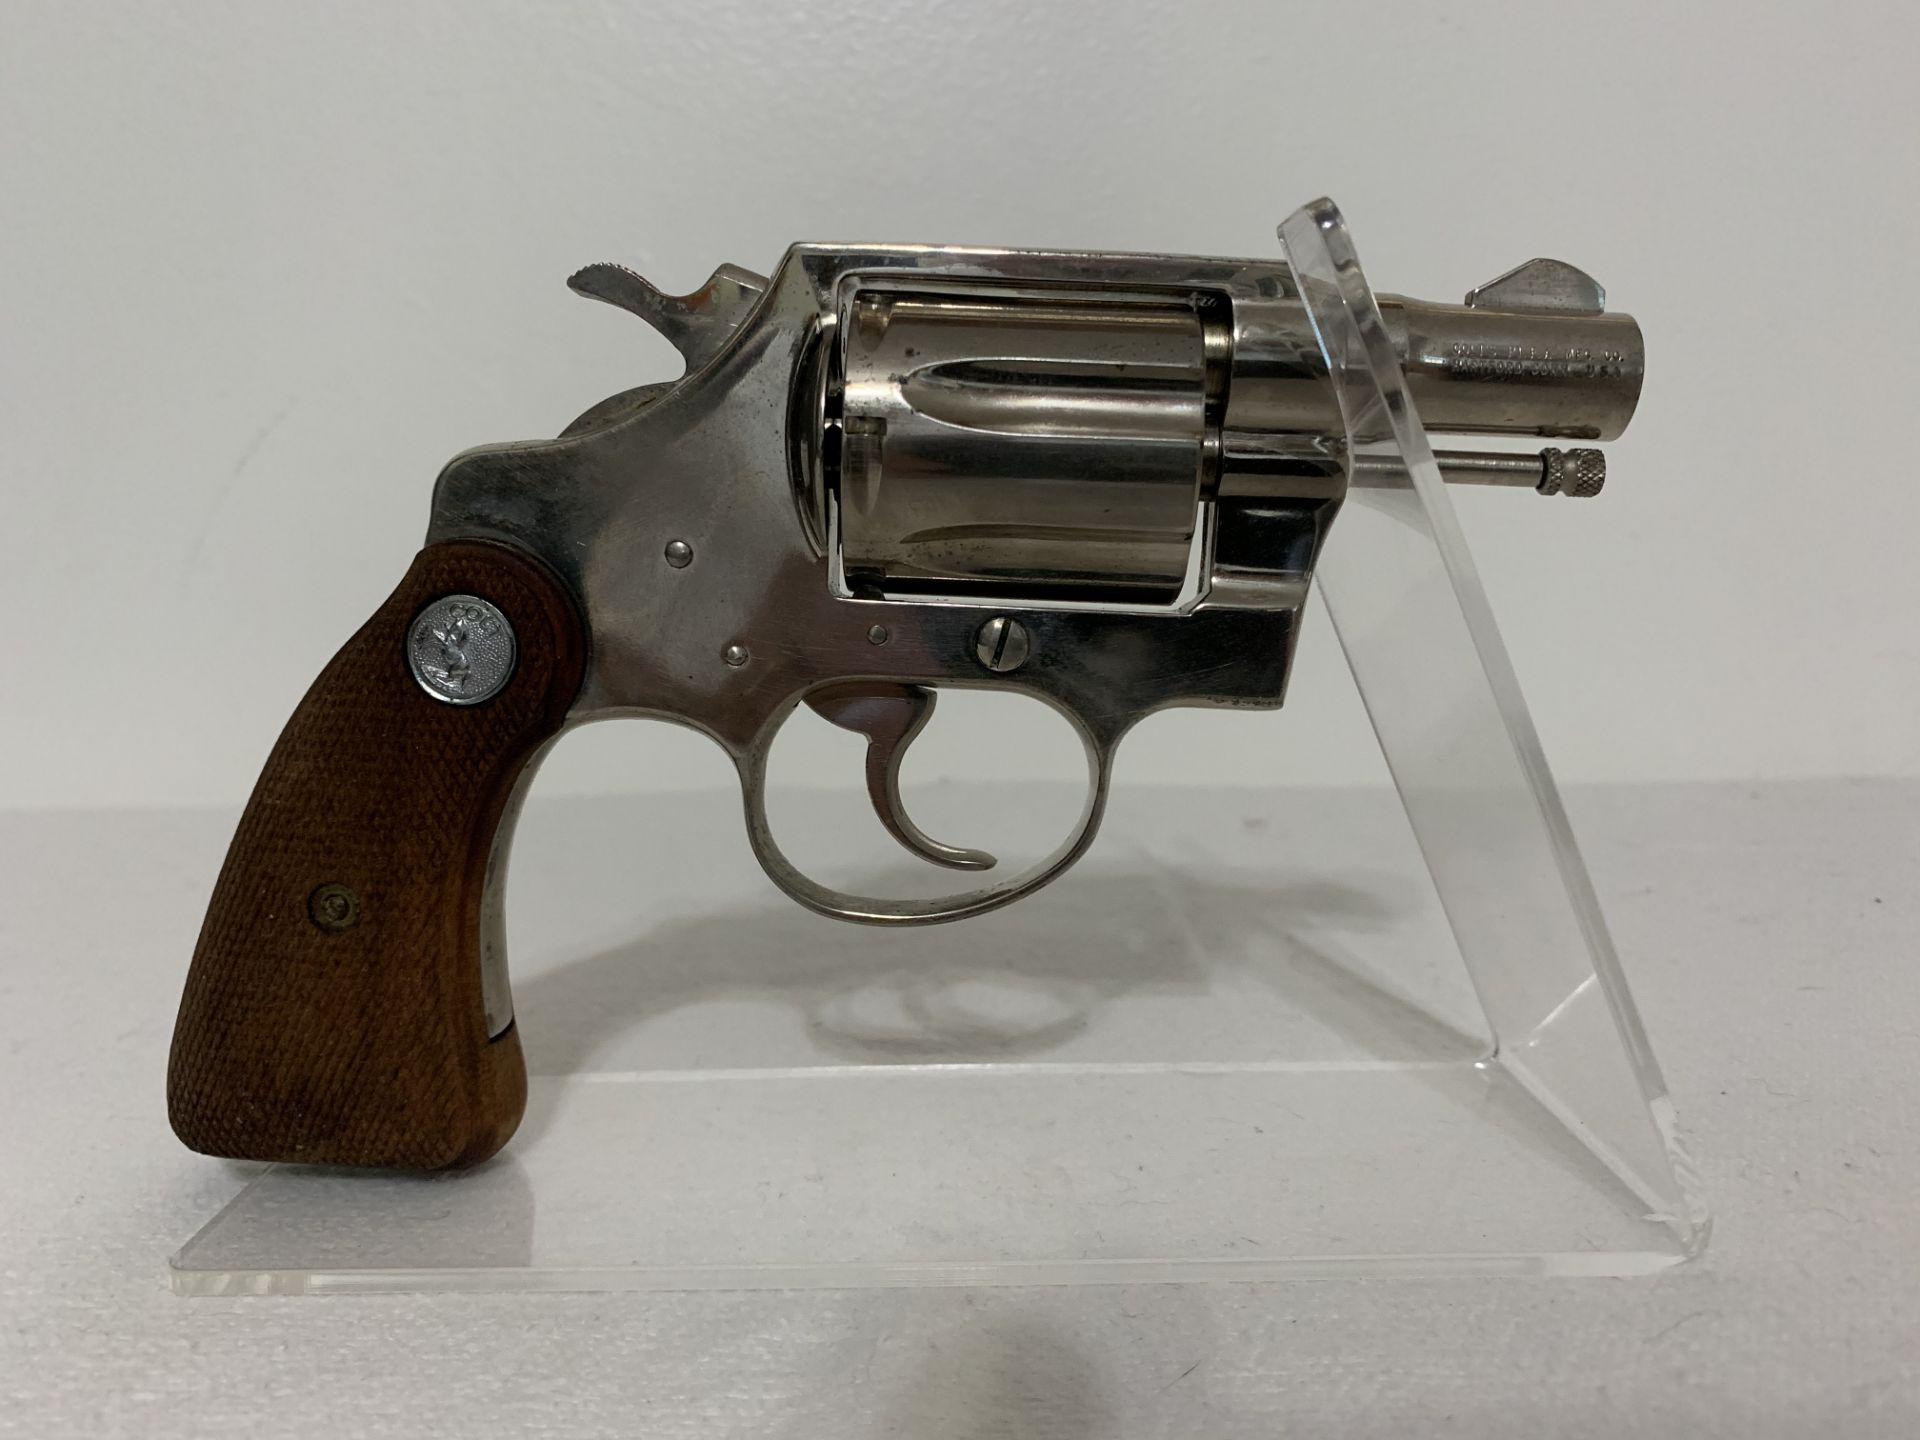 COLT DETECTIVE SPECIAL PISTOL - 38 CAL - NICKEL - WITH ORIGINAL 1971 GRIPS (FOB HOLLYWOOD, FL)